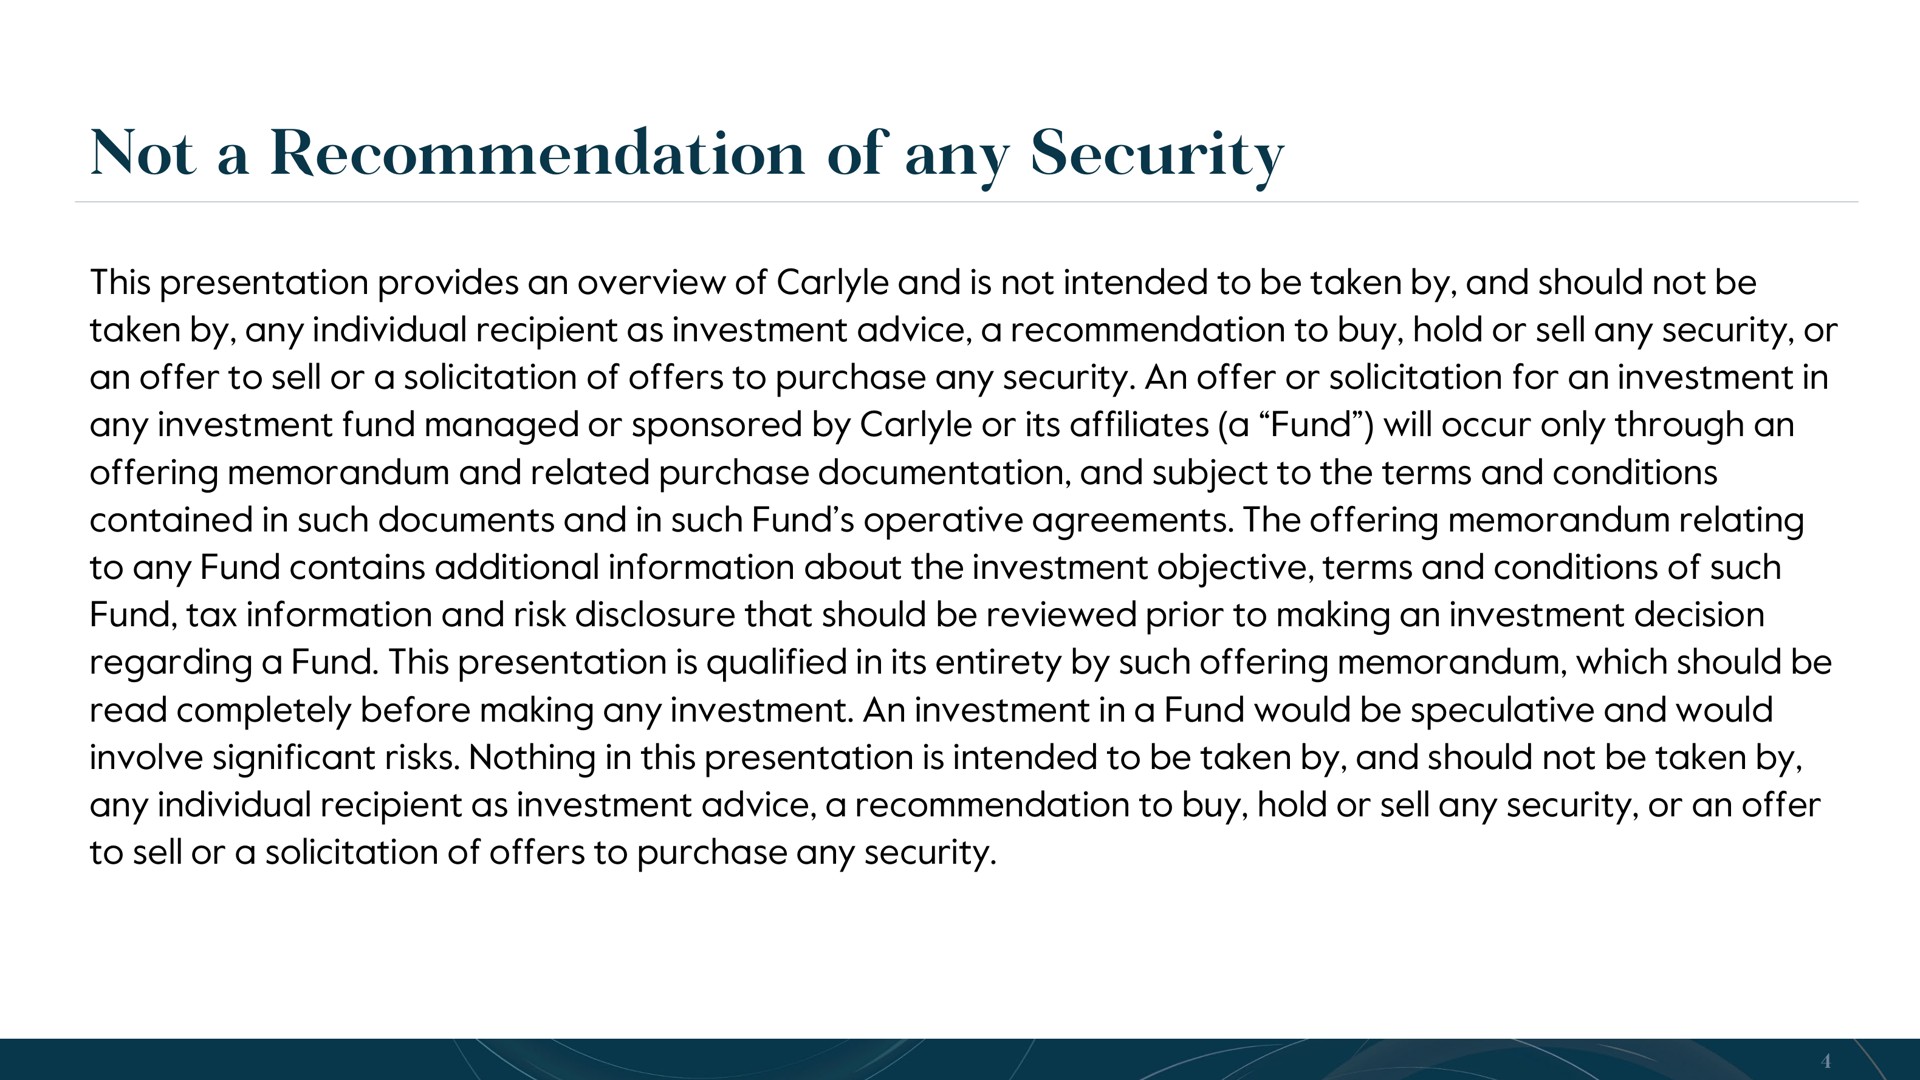 not a recommendation of any security | Carlyle